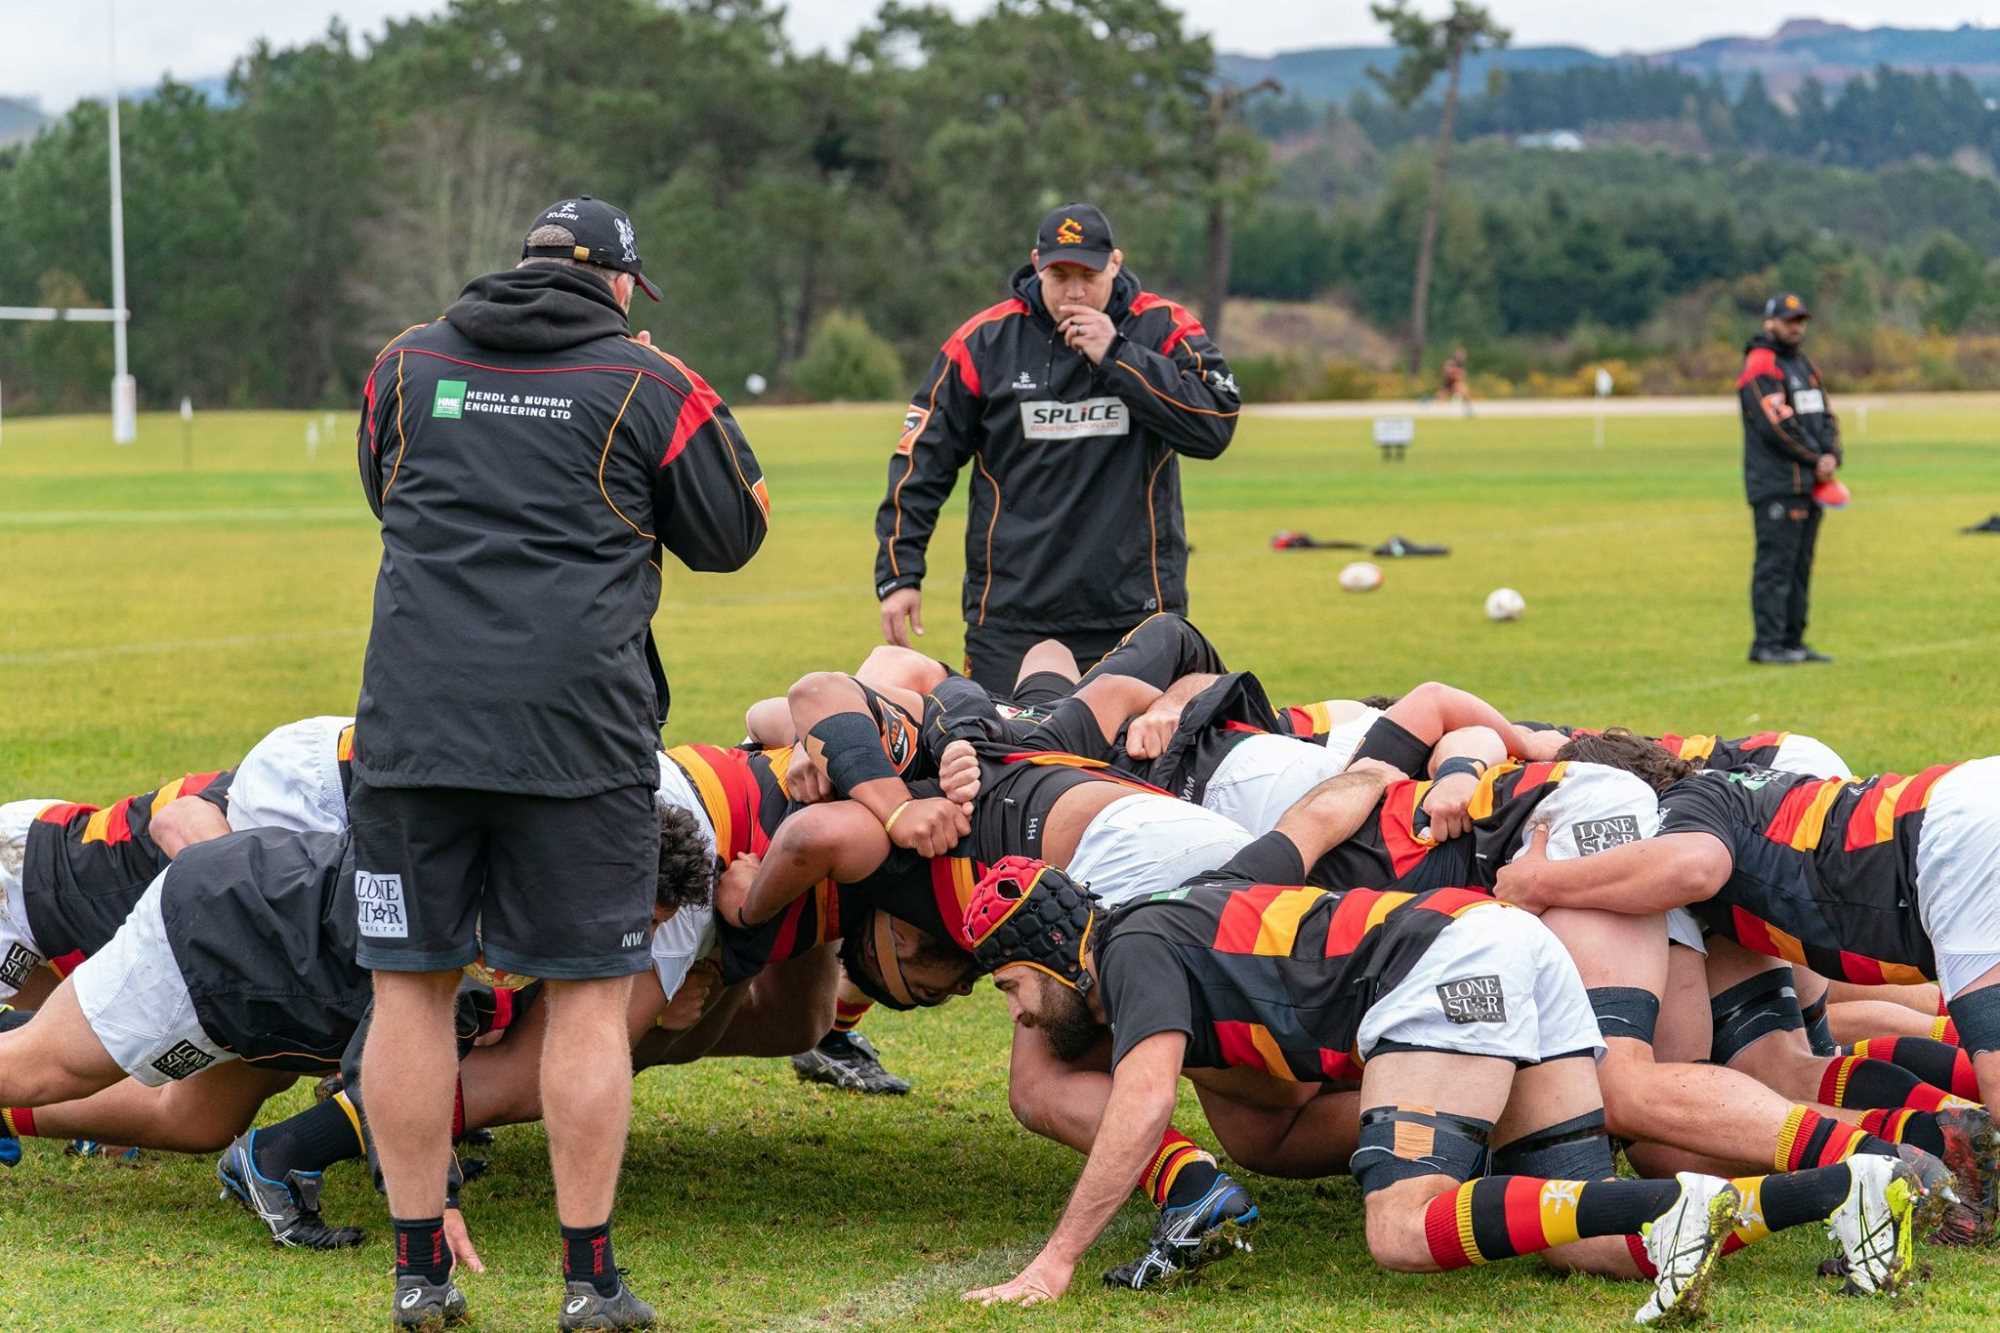 Waikato Team Named for First 2018 Mitre 10 Cup Match